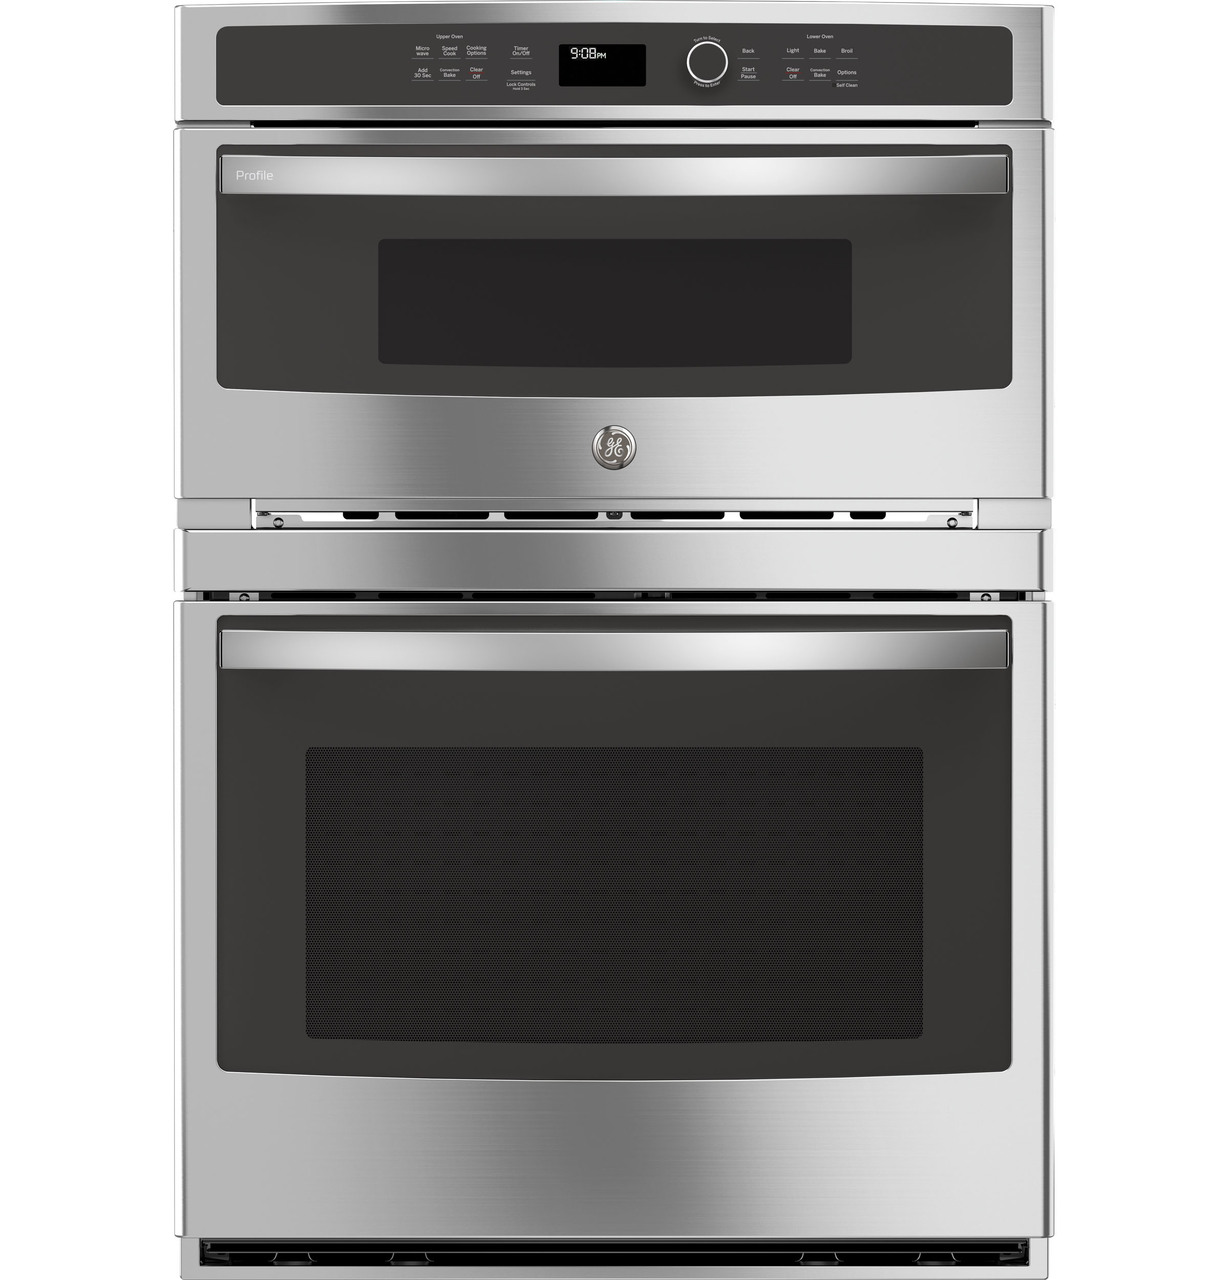 GE combination double wall oven with convection and advantium technology.